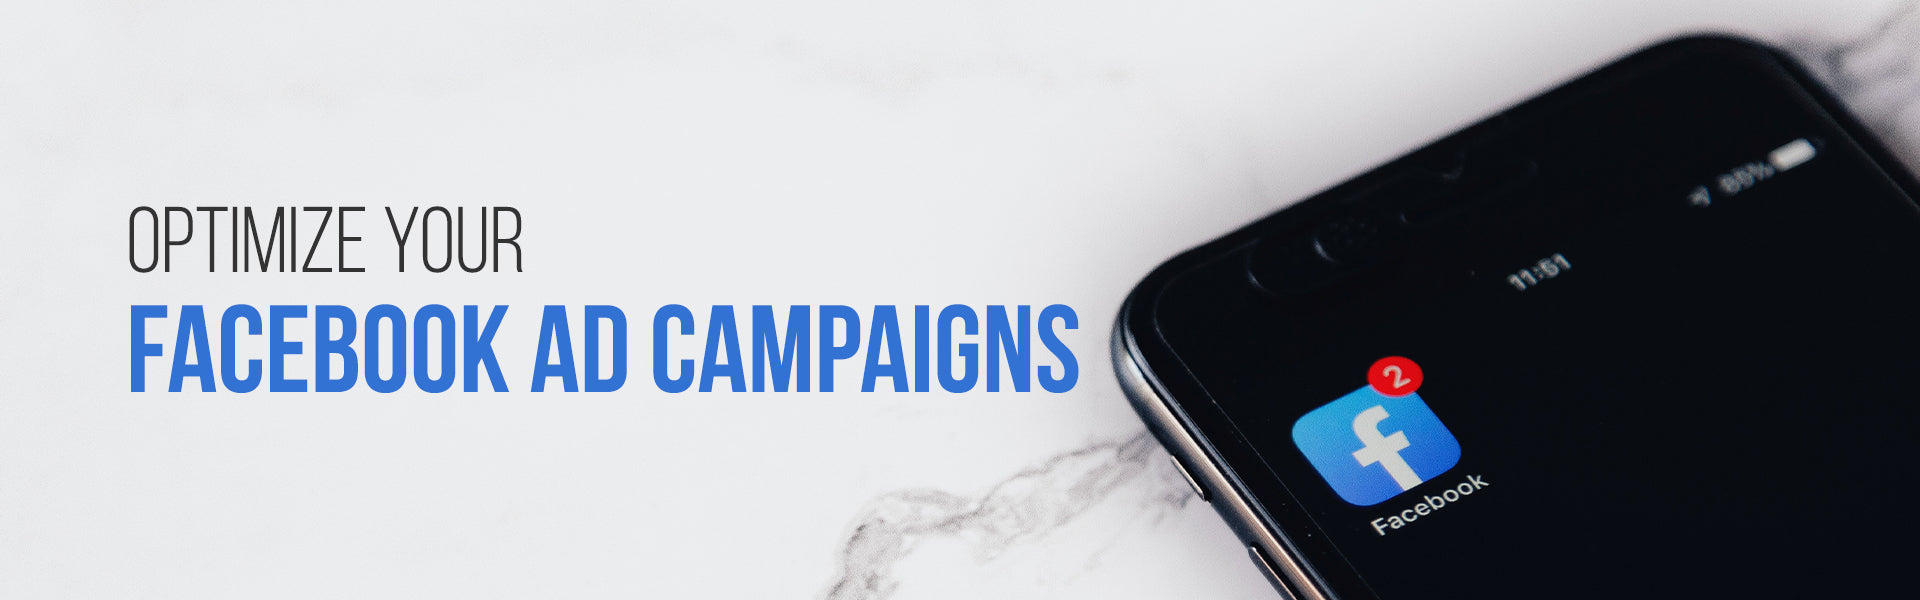 Optimize your Facebook ad campaigns